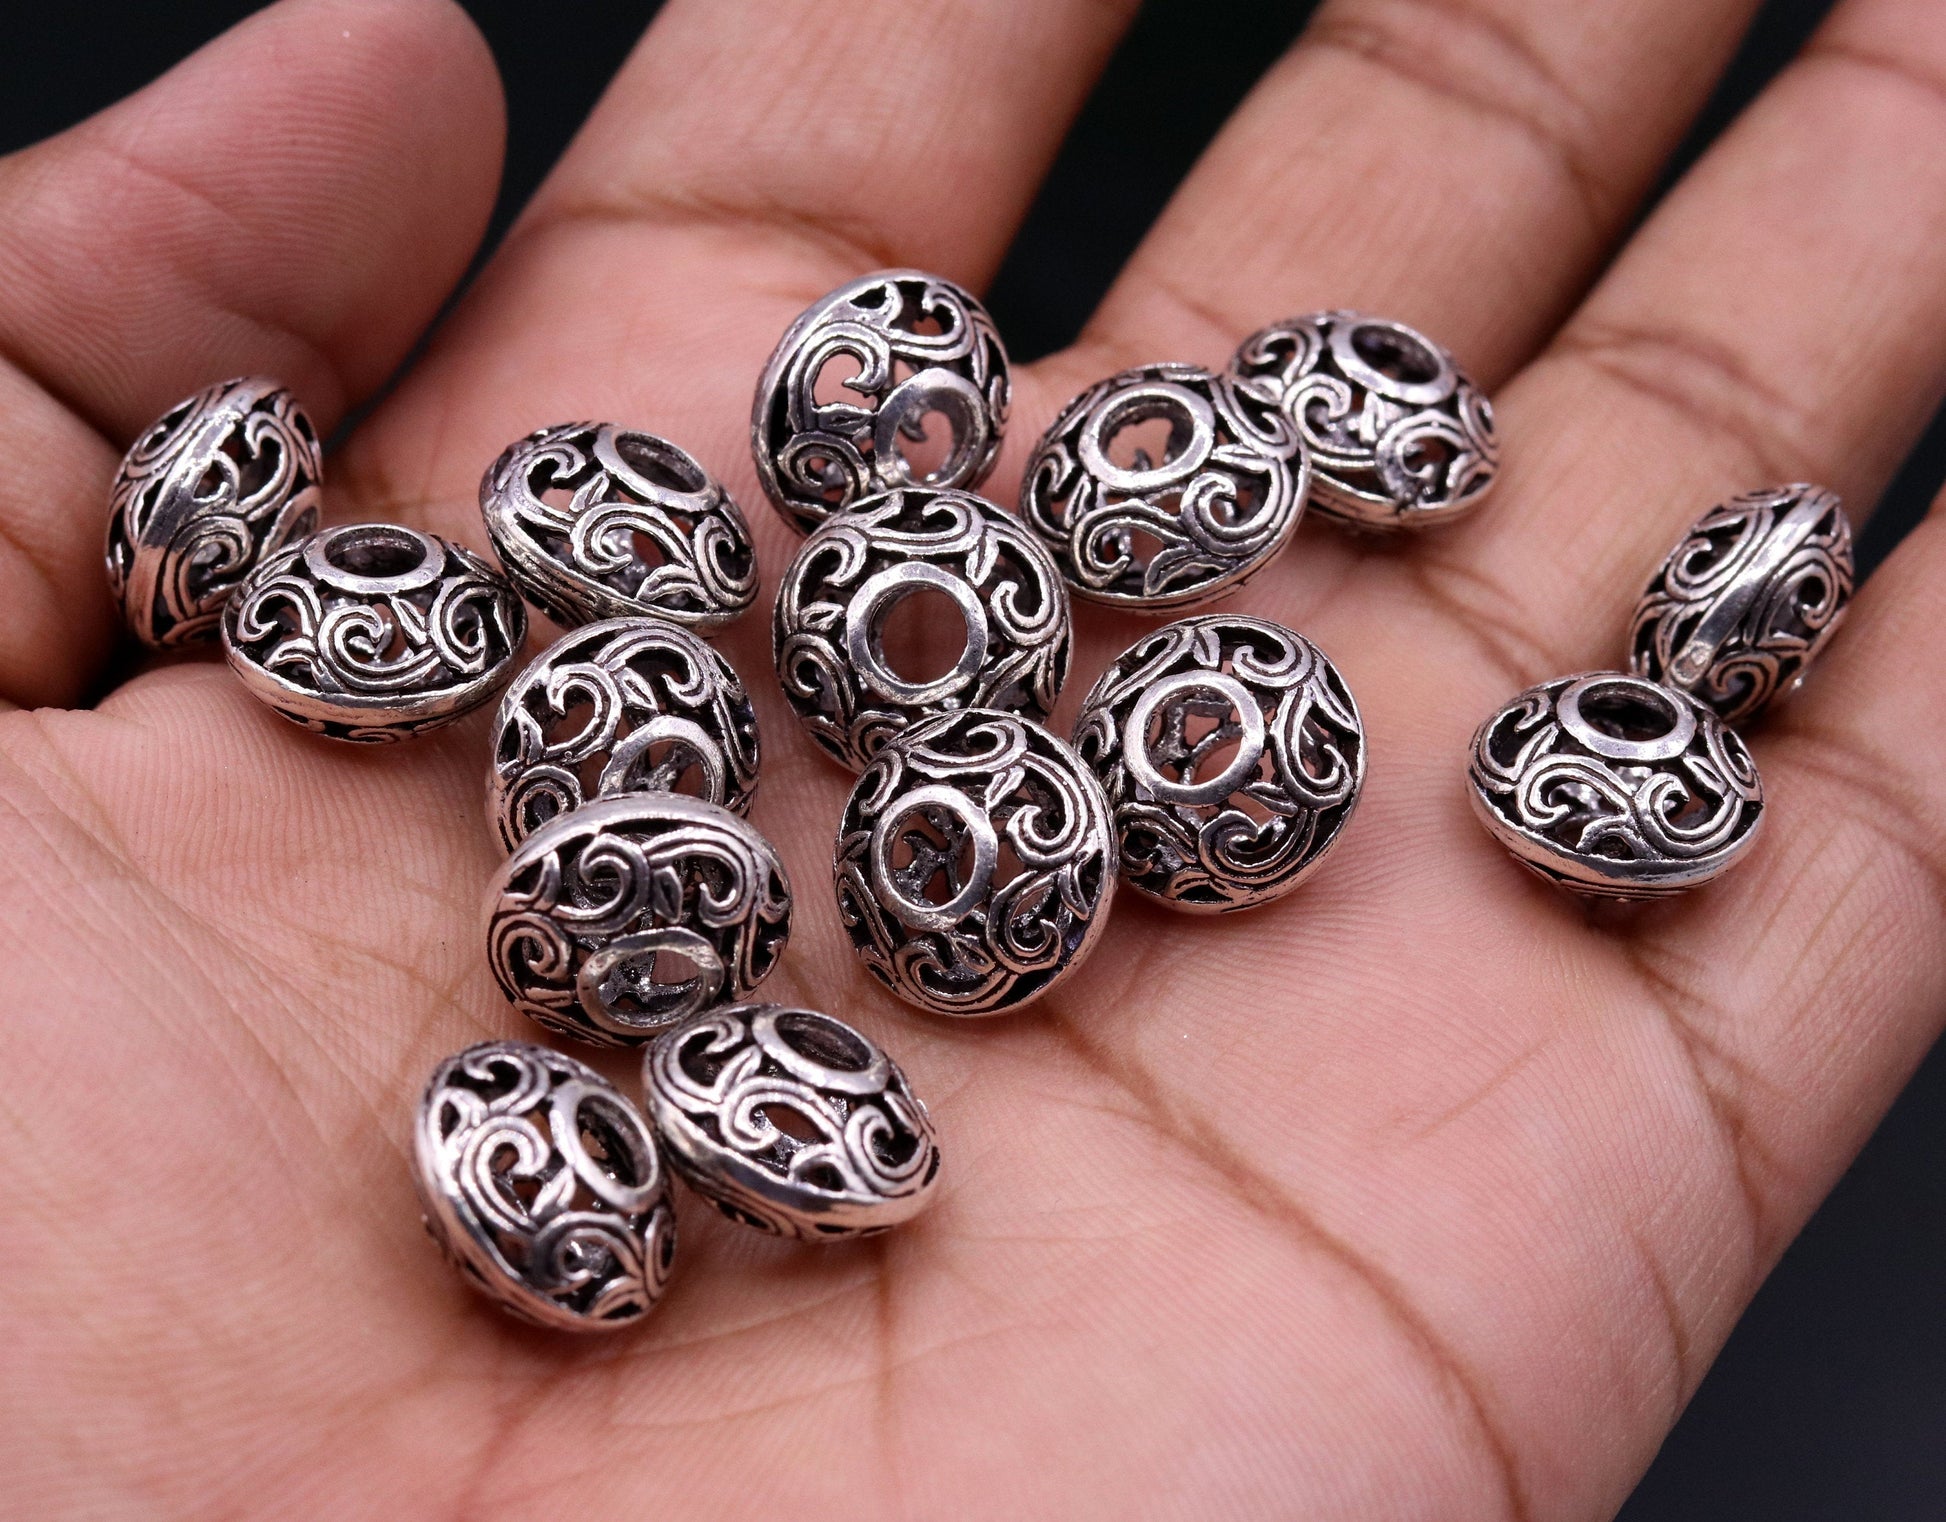 Lot 10 pieces 925 Sterling silver handmade awesome beads jewelry findings for special antique jewelry making ideas bd03 - TRIBAL ORNAMENTS